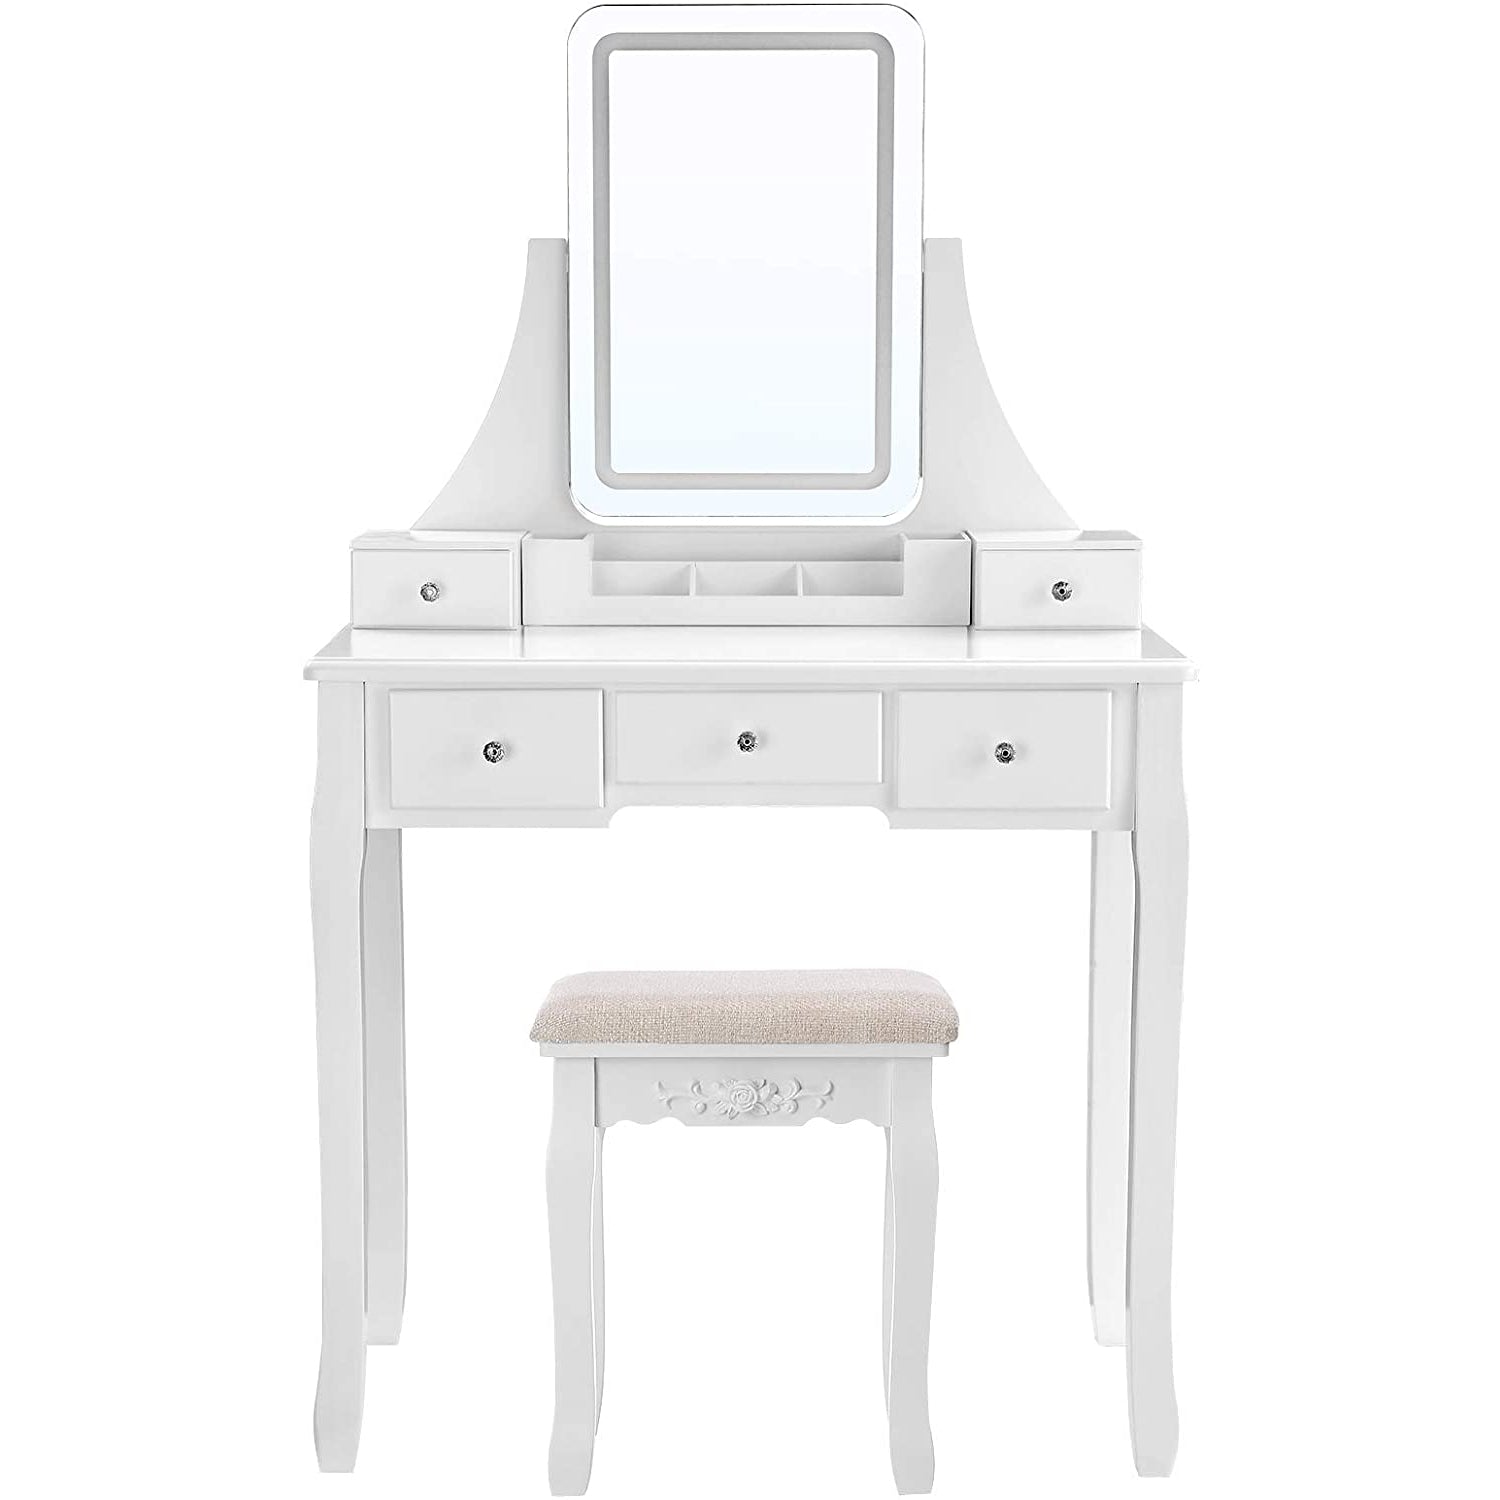 Nancy's Sophora Dressing Table with LED lighting - Make-up Table - Mirror - 5 Drawers - With Stool - White - 80 x 40 x 137.5 cm (lxwxh)